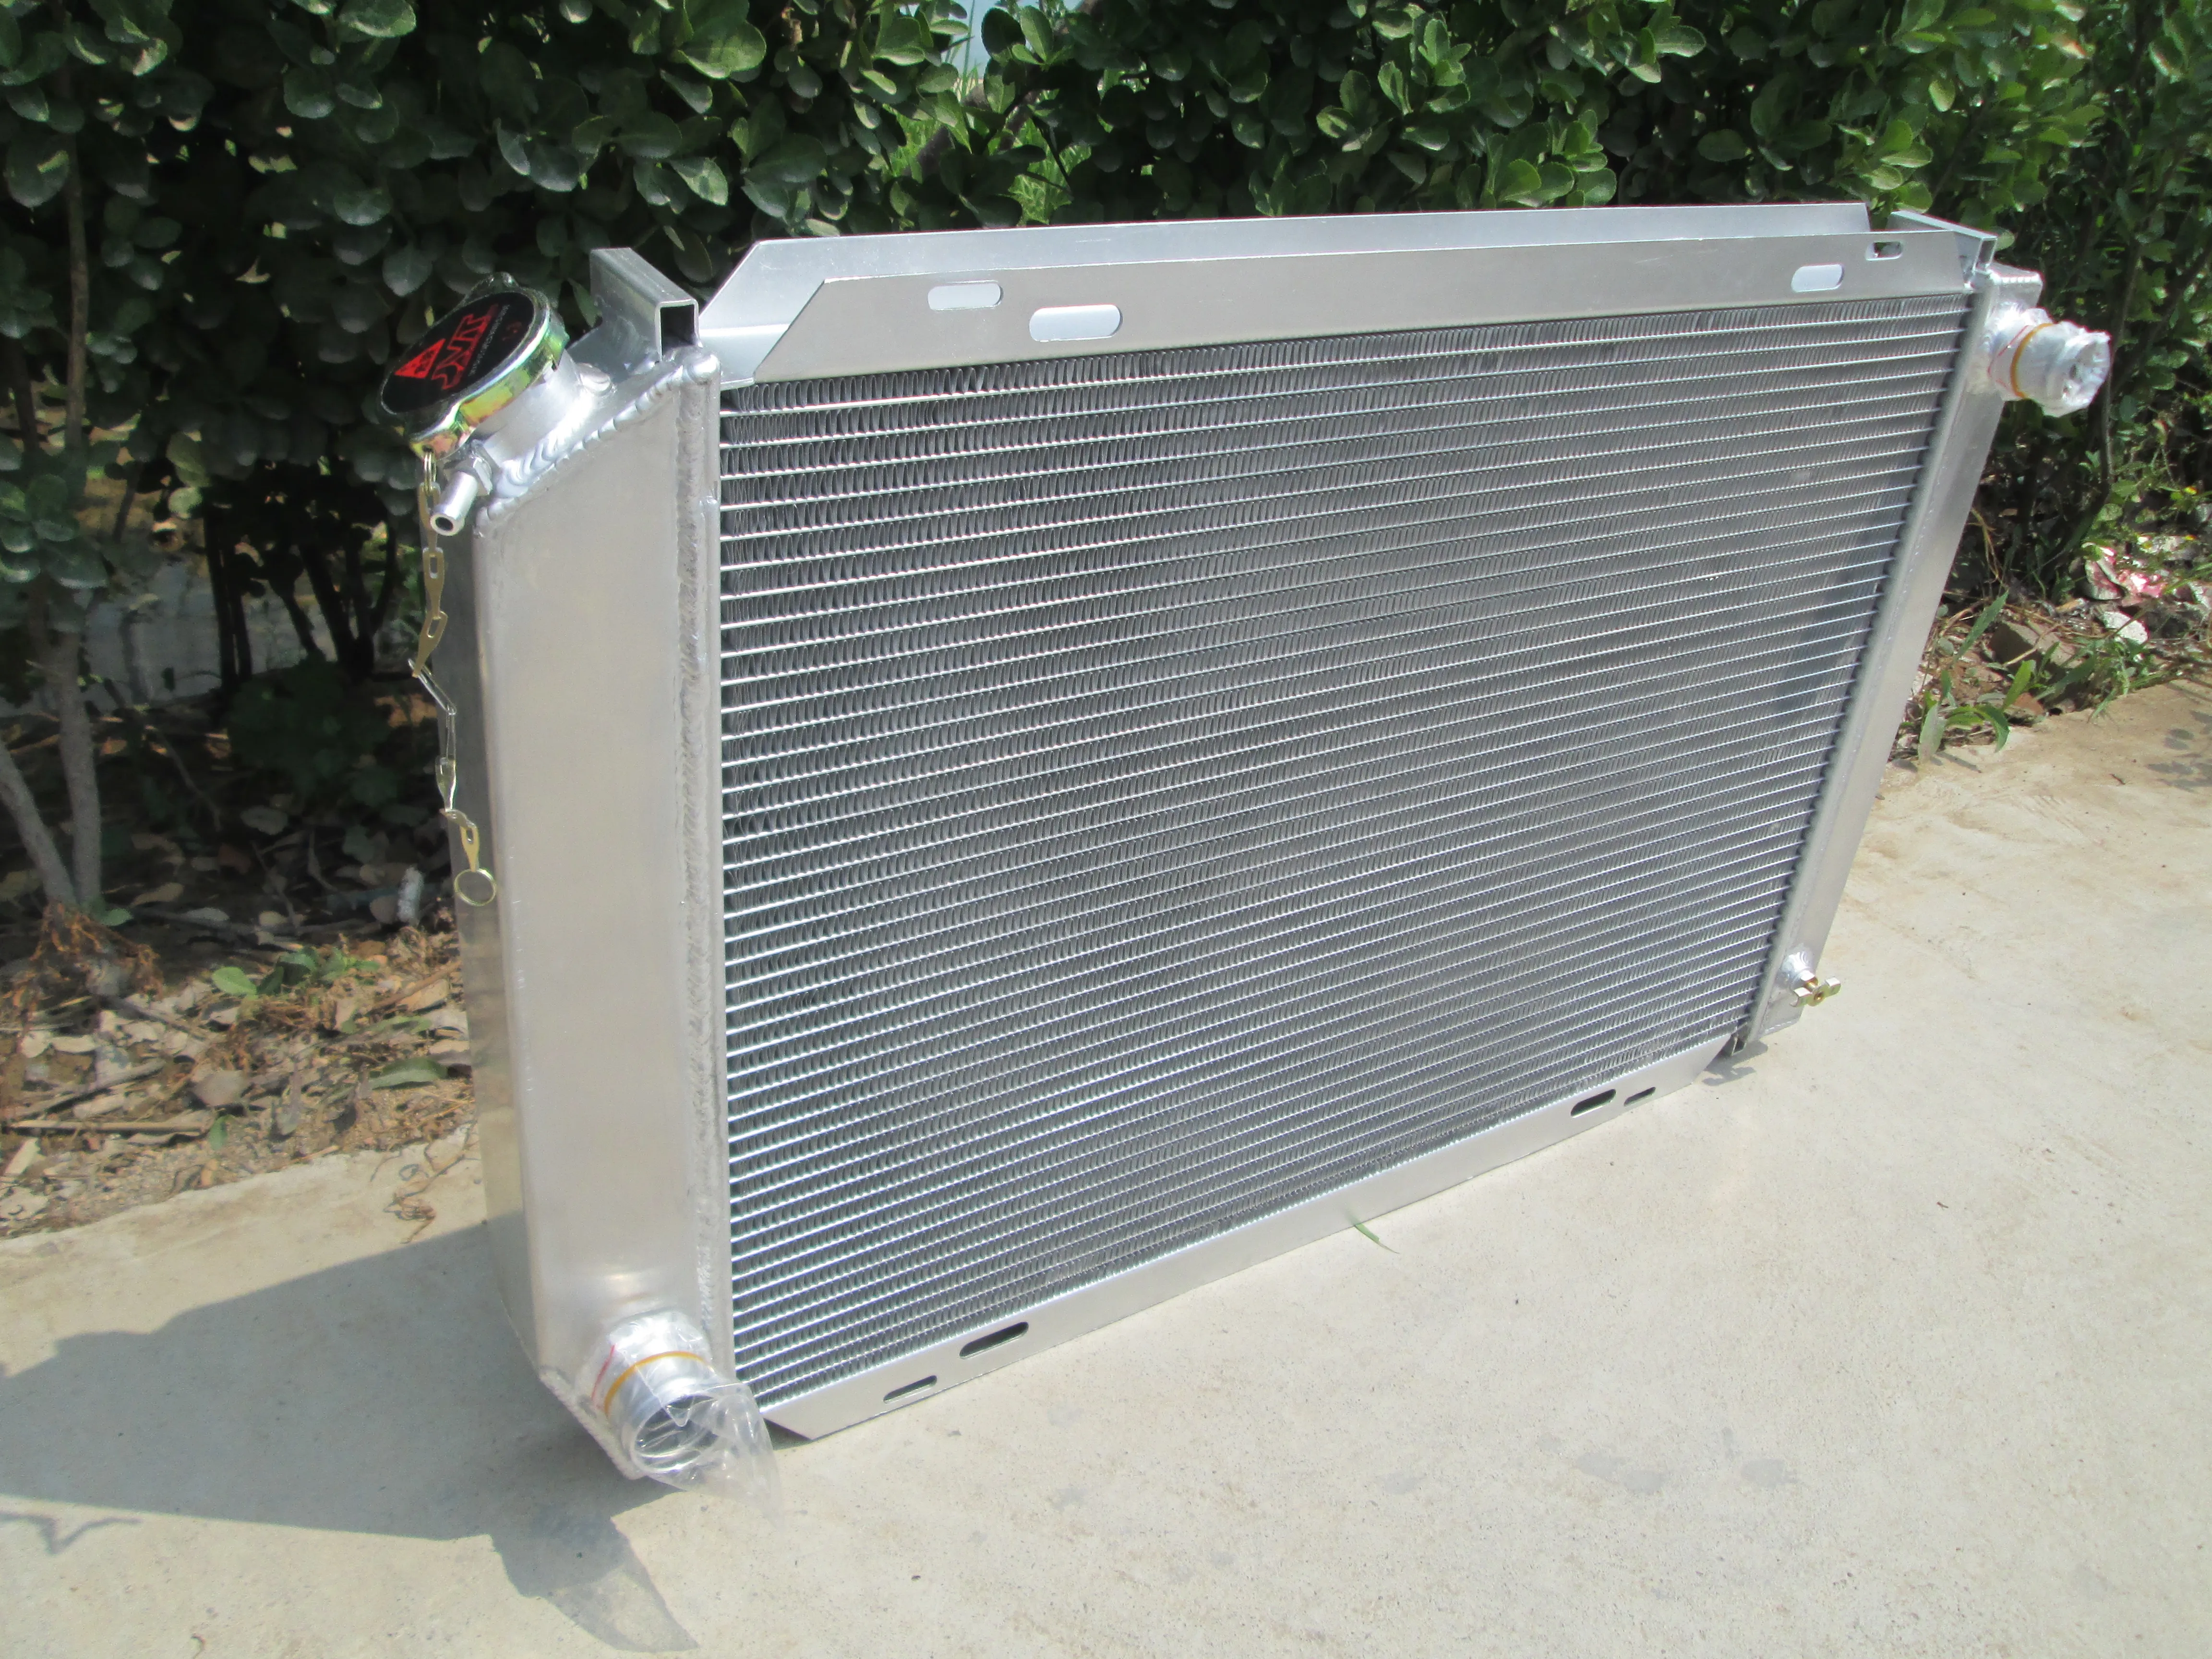 

50mm 2Row Aluminum Radiator For 1979-1993 Ford Mustang Foxbody MT 1980 1981 1982 1983 1984 1985 1986 1987 1988 1989 1990 1991